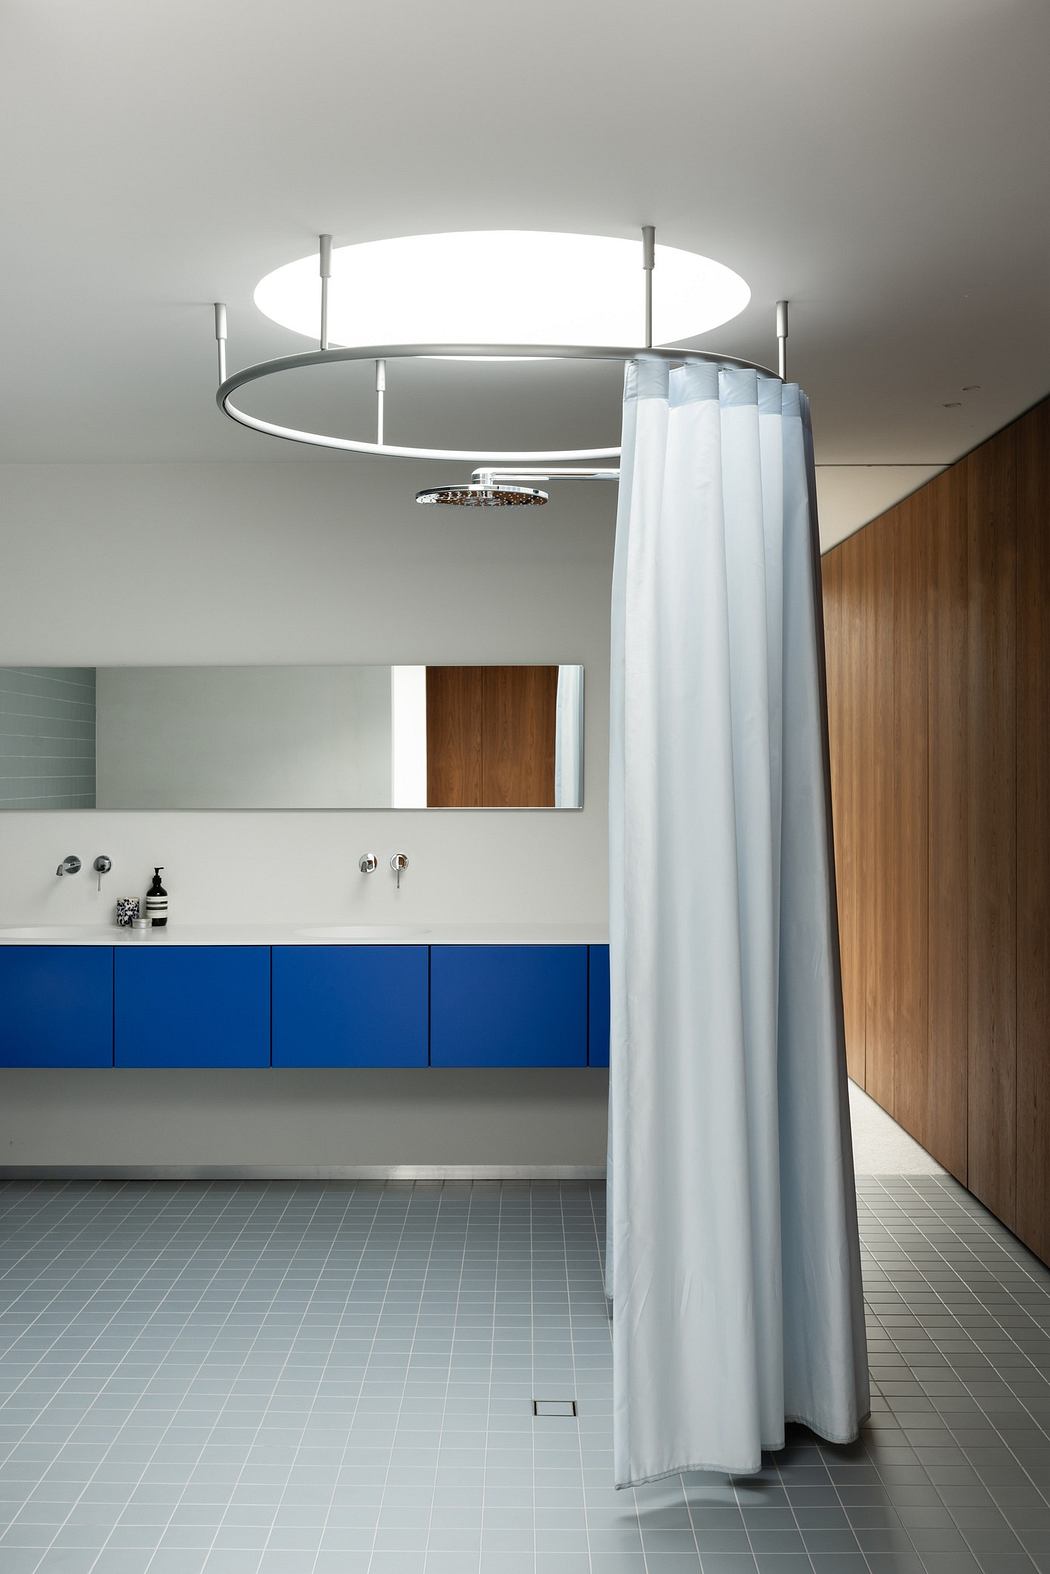 Modern bathroom with wooden cabinets, blue vanity, and round shower curtain.